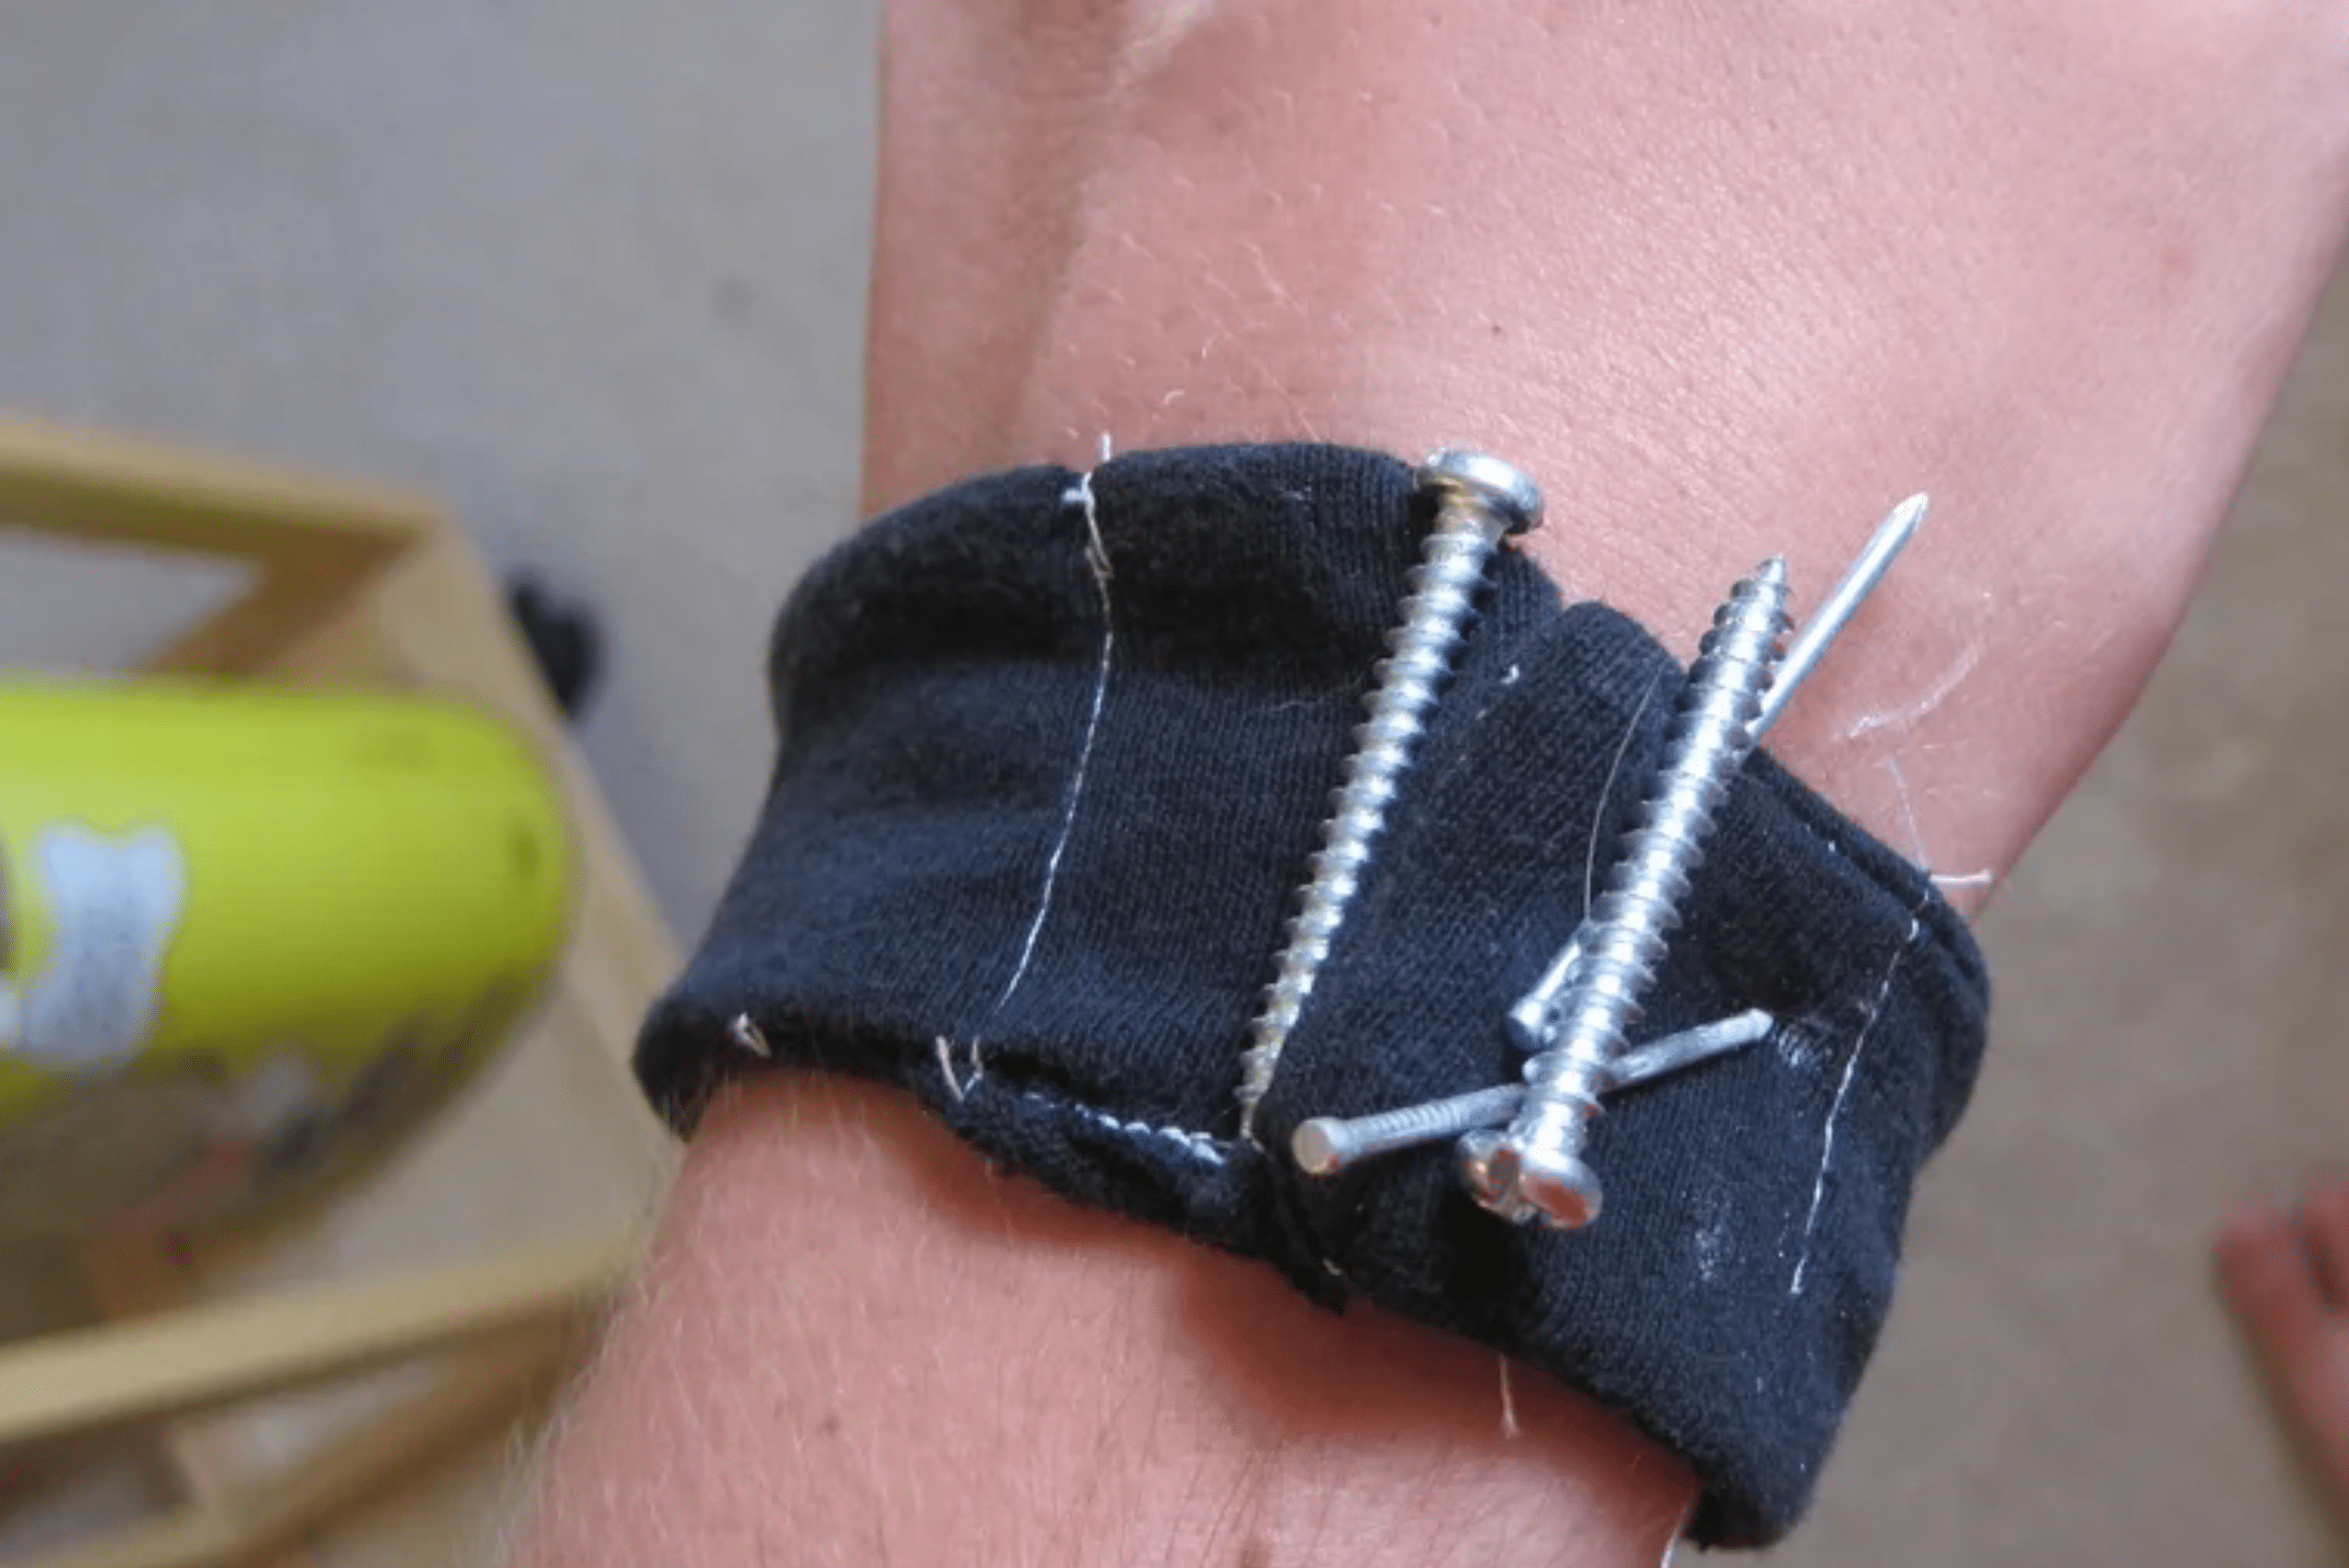 A magnetic wrist band with screws attached to it.